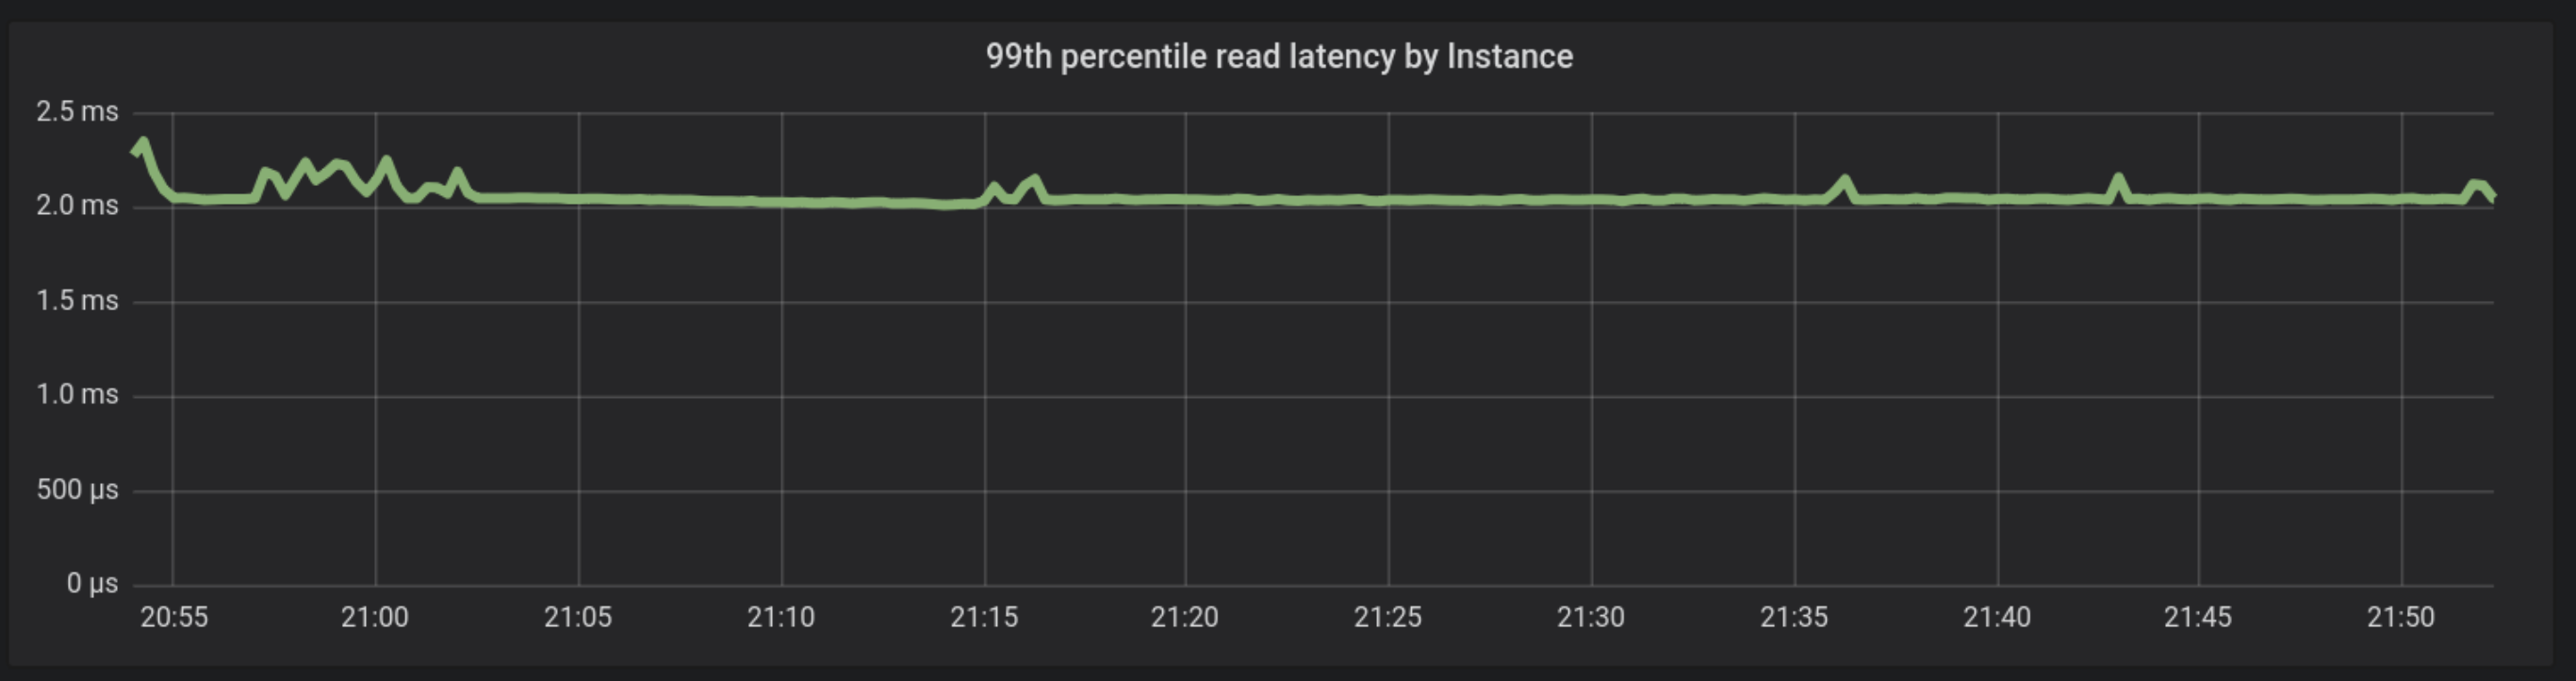 Figure 6: p99 read latencies for Scylla on the AWS i3en.24xlarge